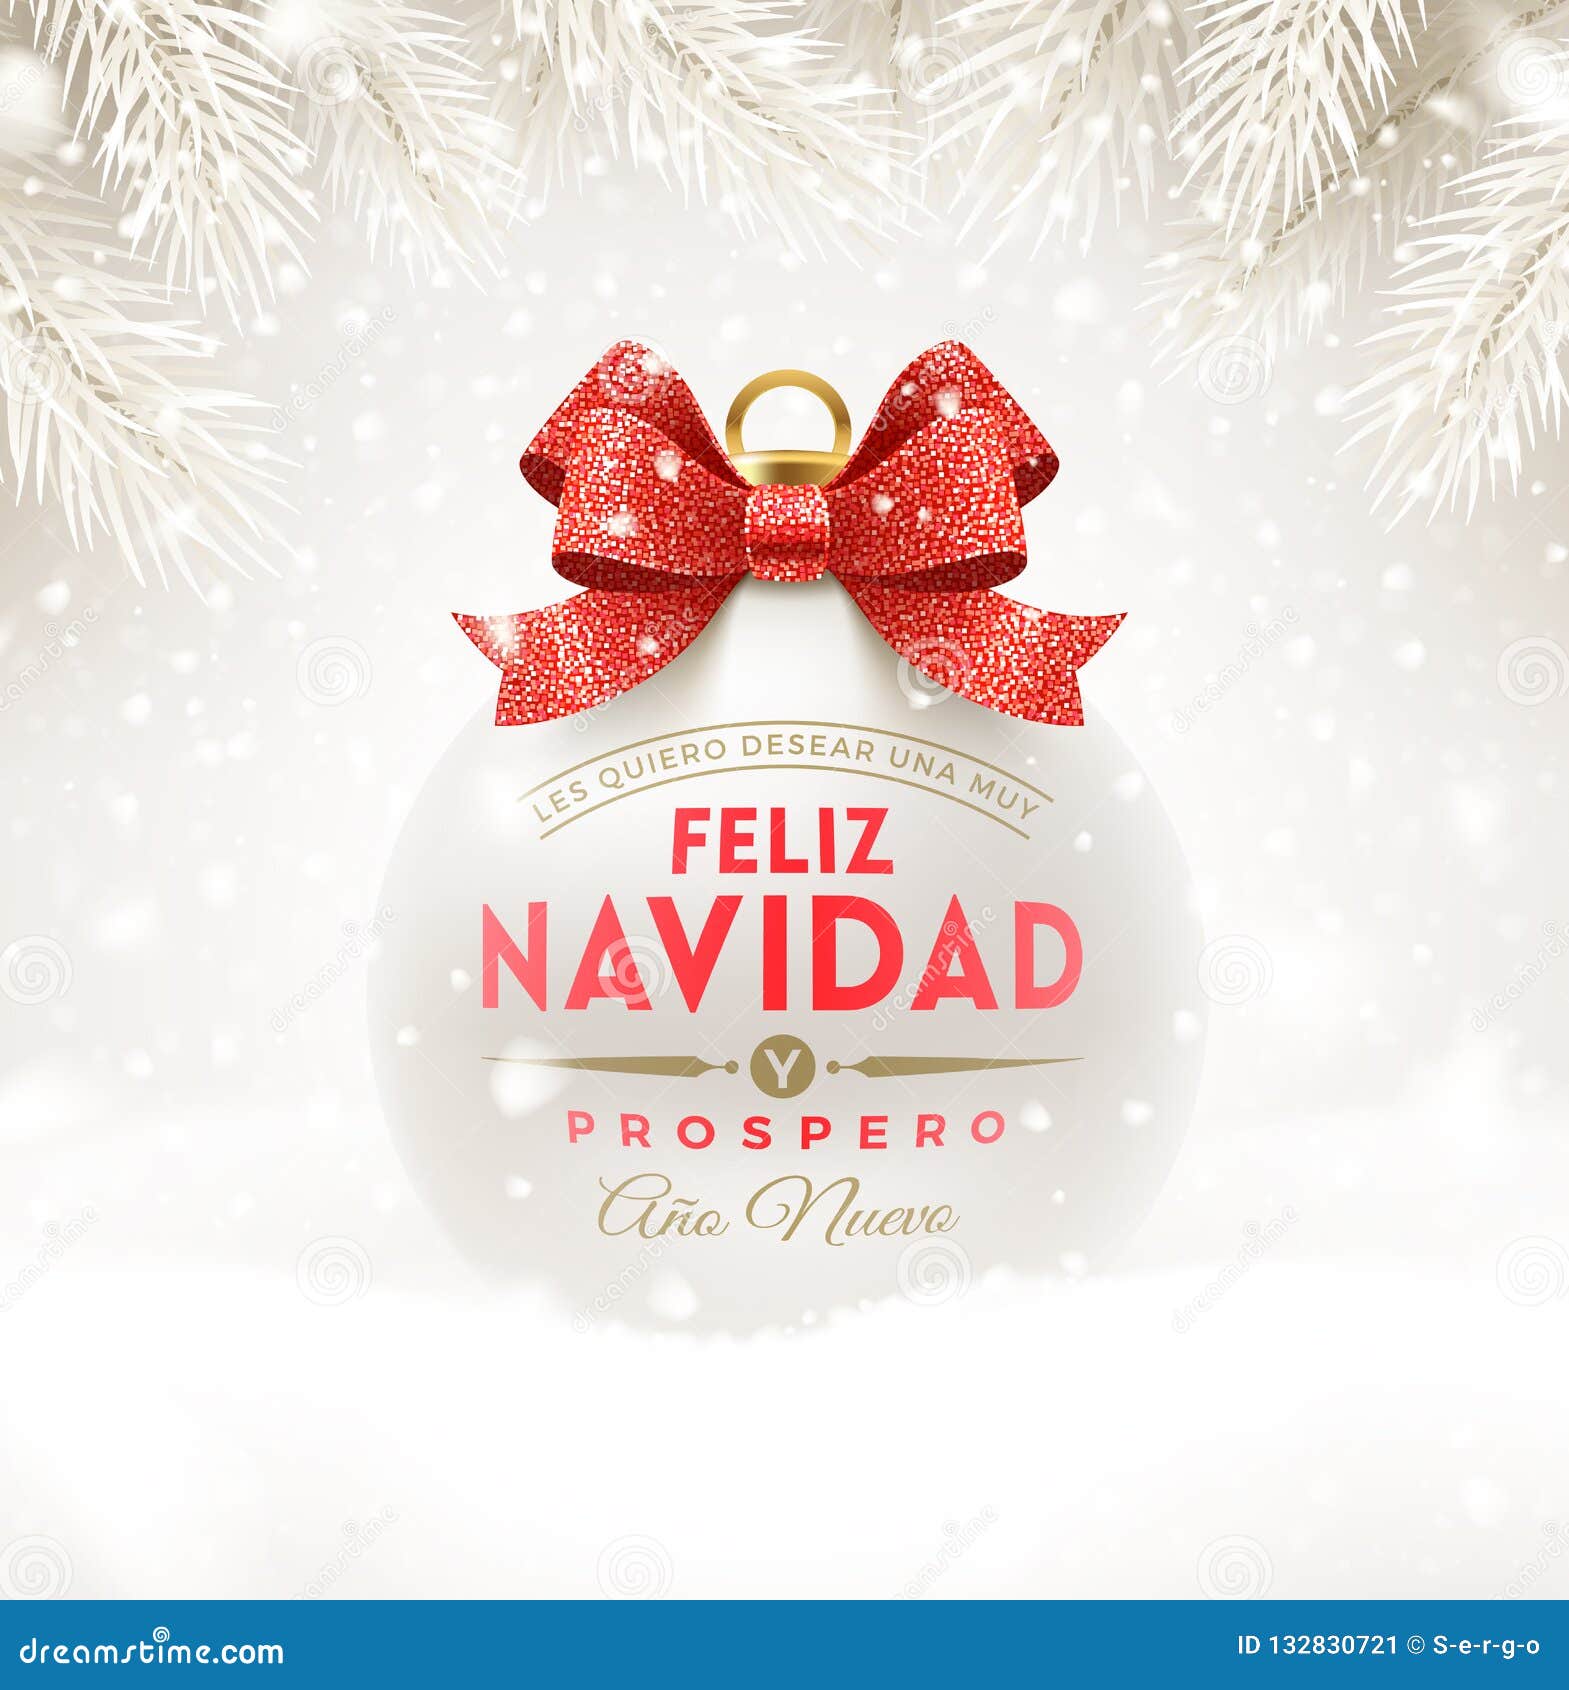 feliz navidad - christmas greetings in spanish. christmas white bauble with glitter red bow ribbon and type .